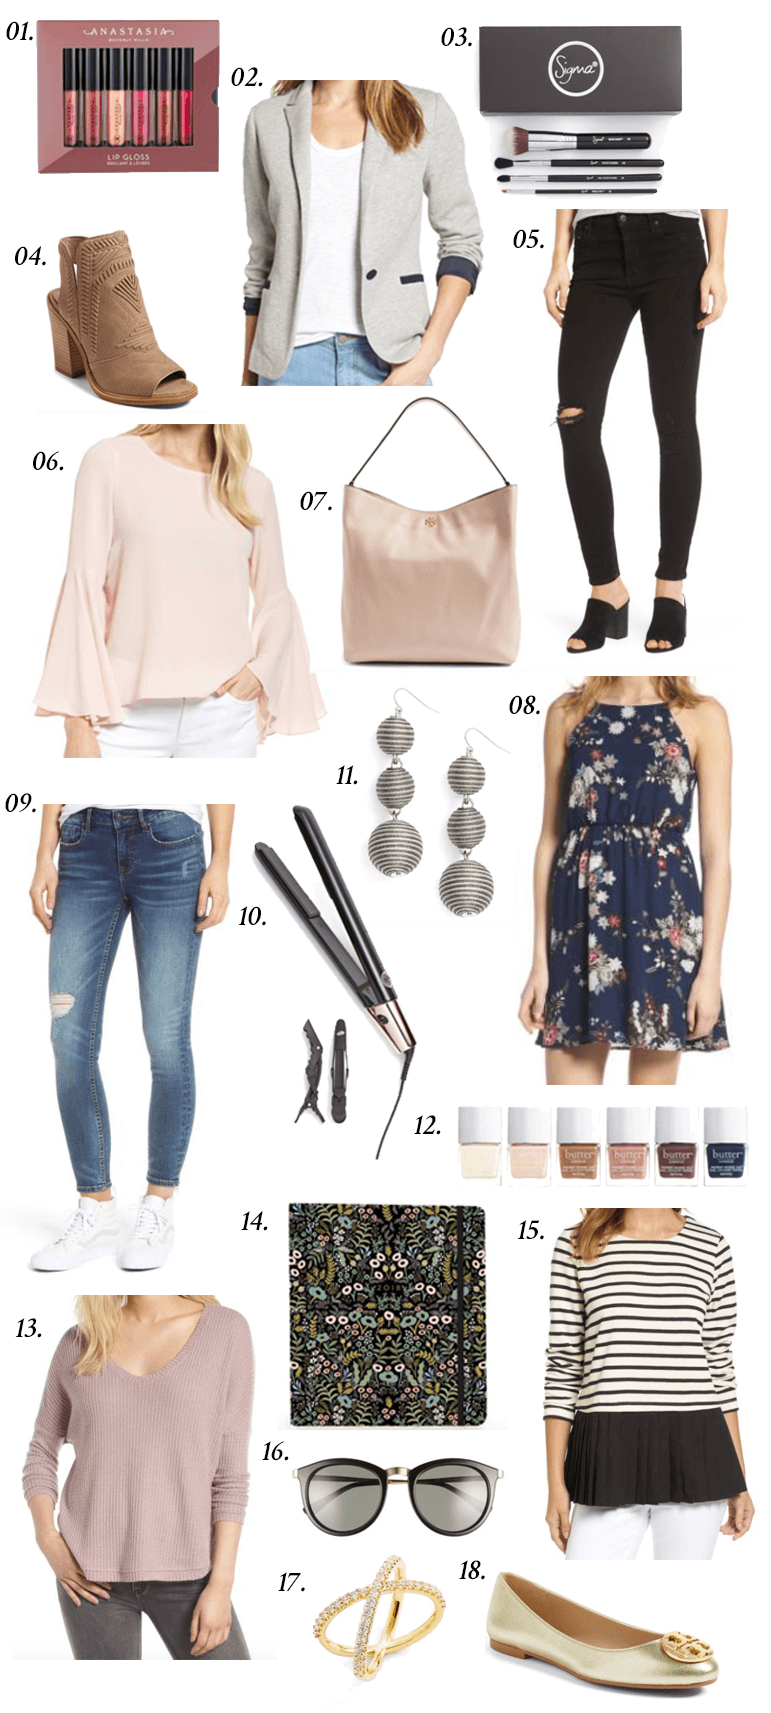 Nordstrom Sale, Shopping Guide, What to Buy